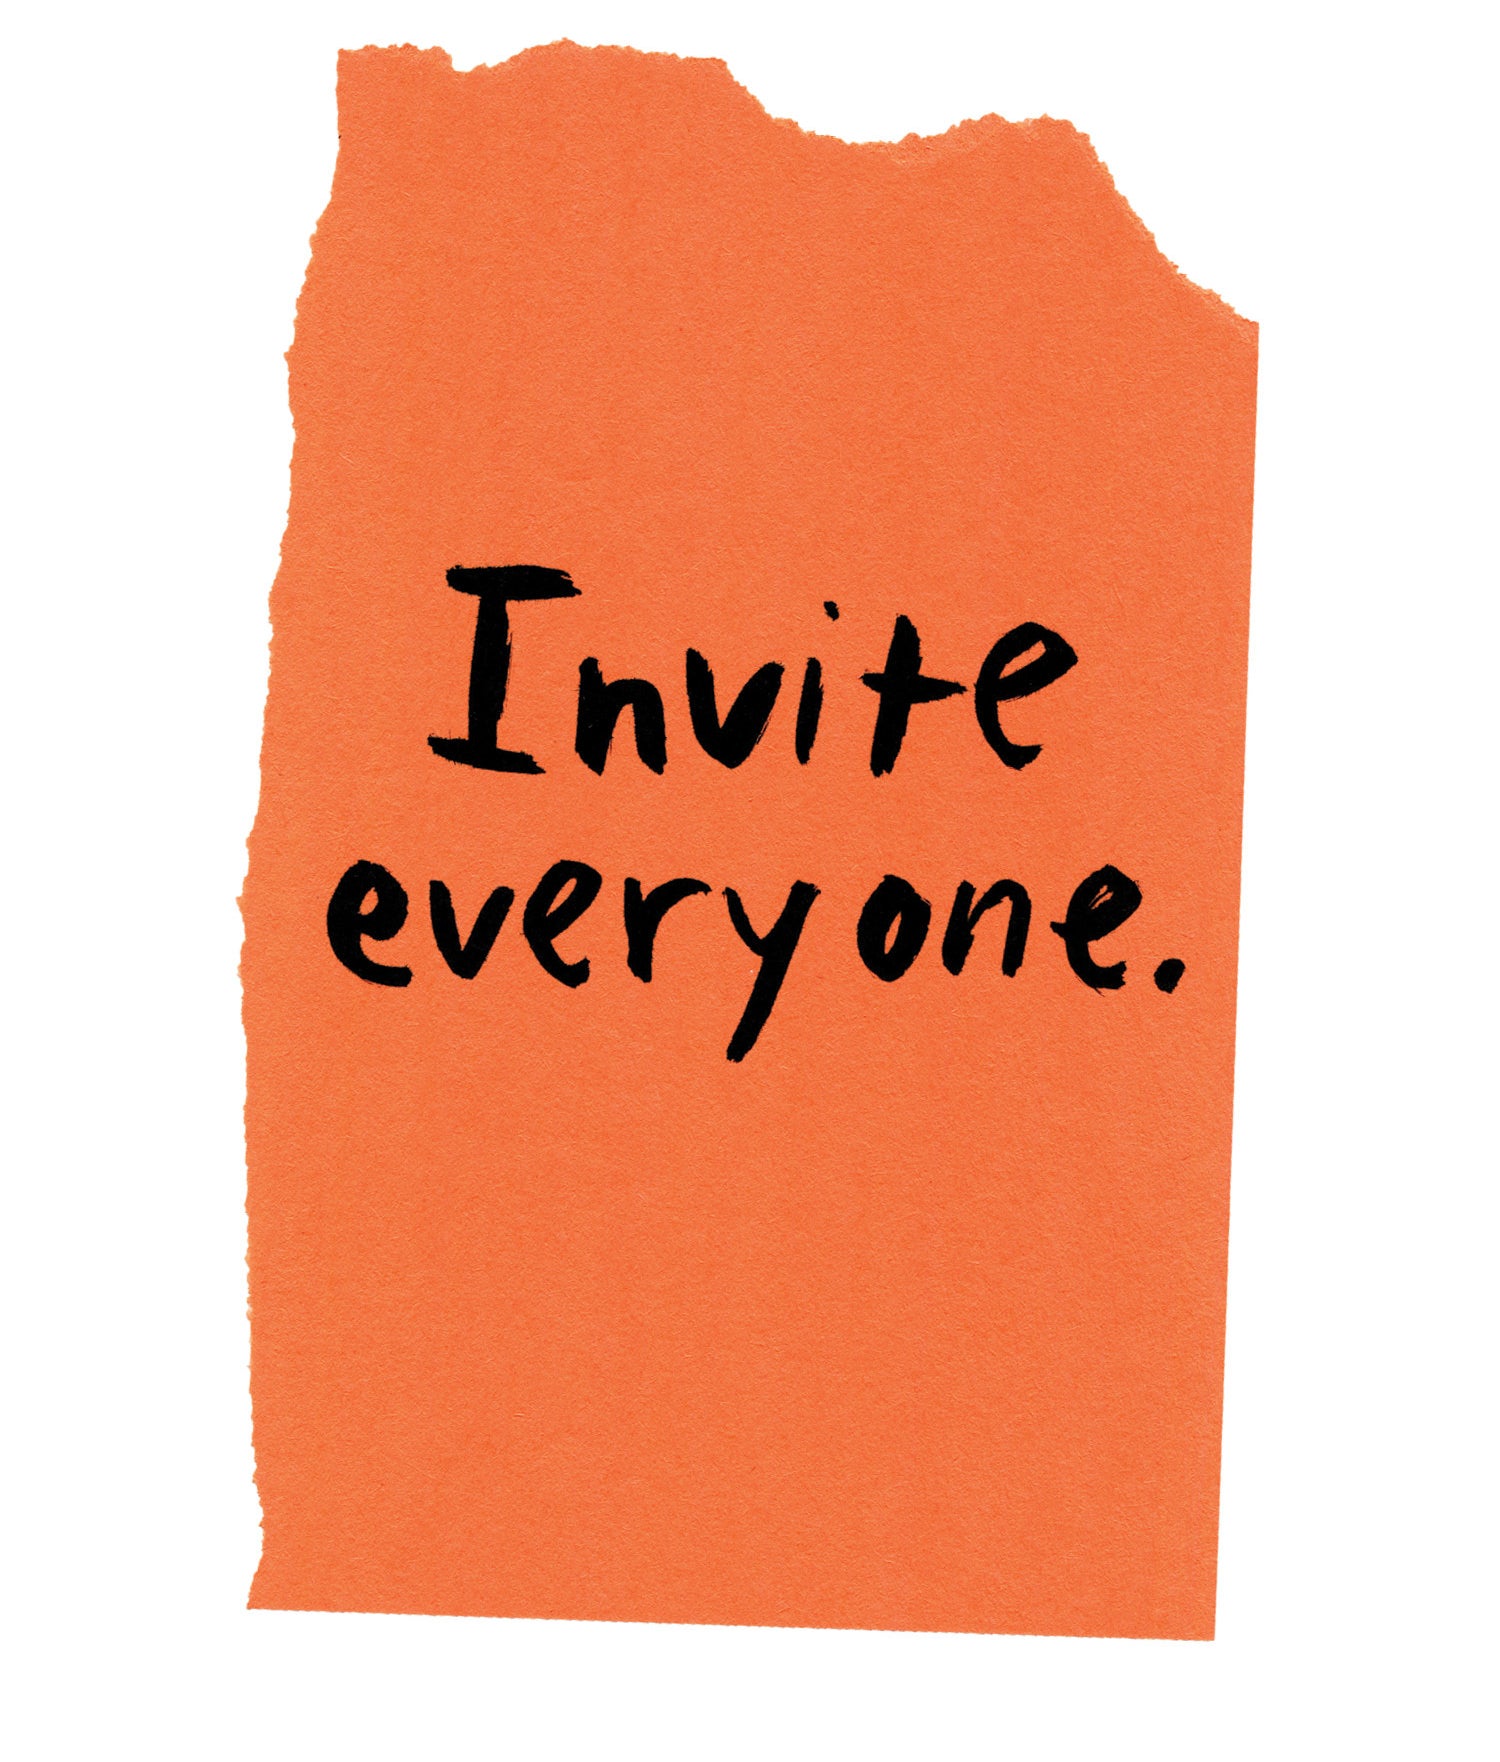 Handwritten text on torn piece of colored paper: &quot;Invite everyone.&quot;